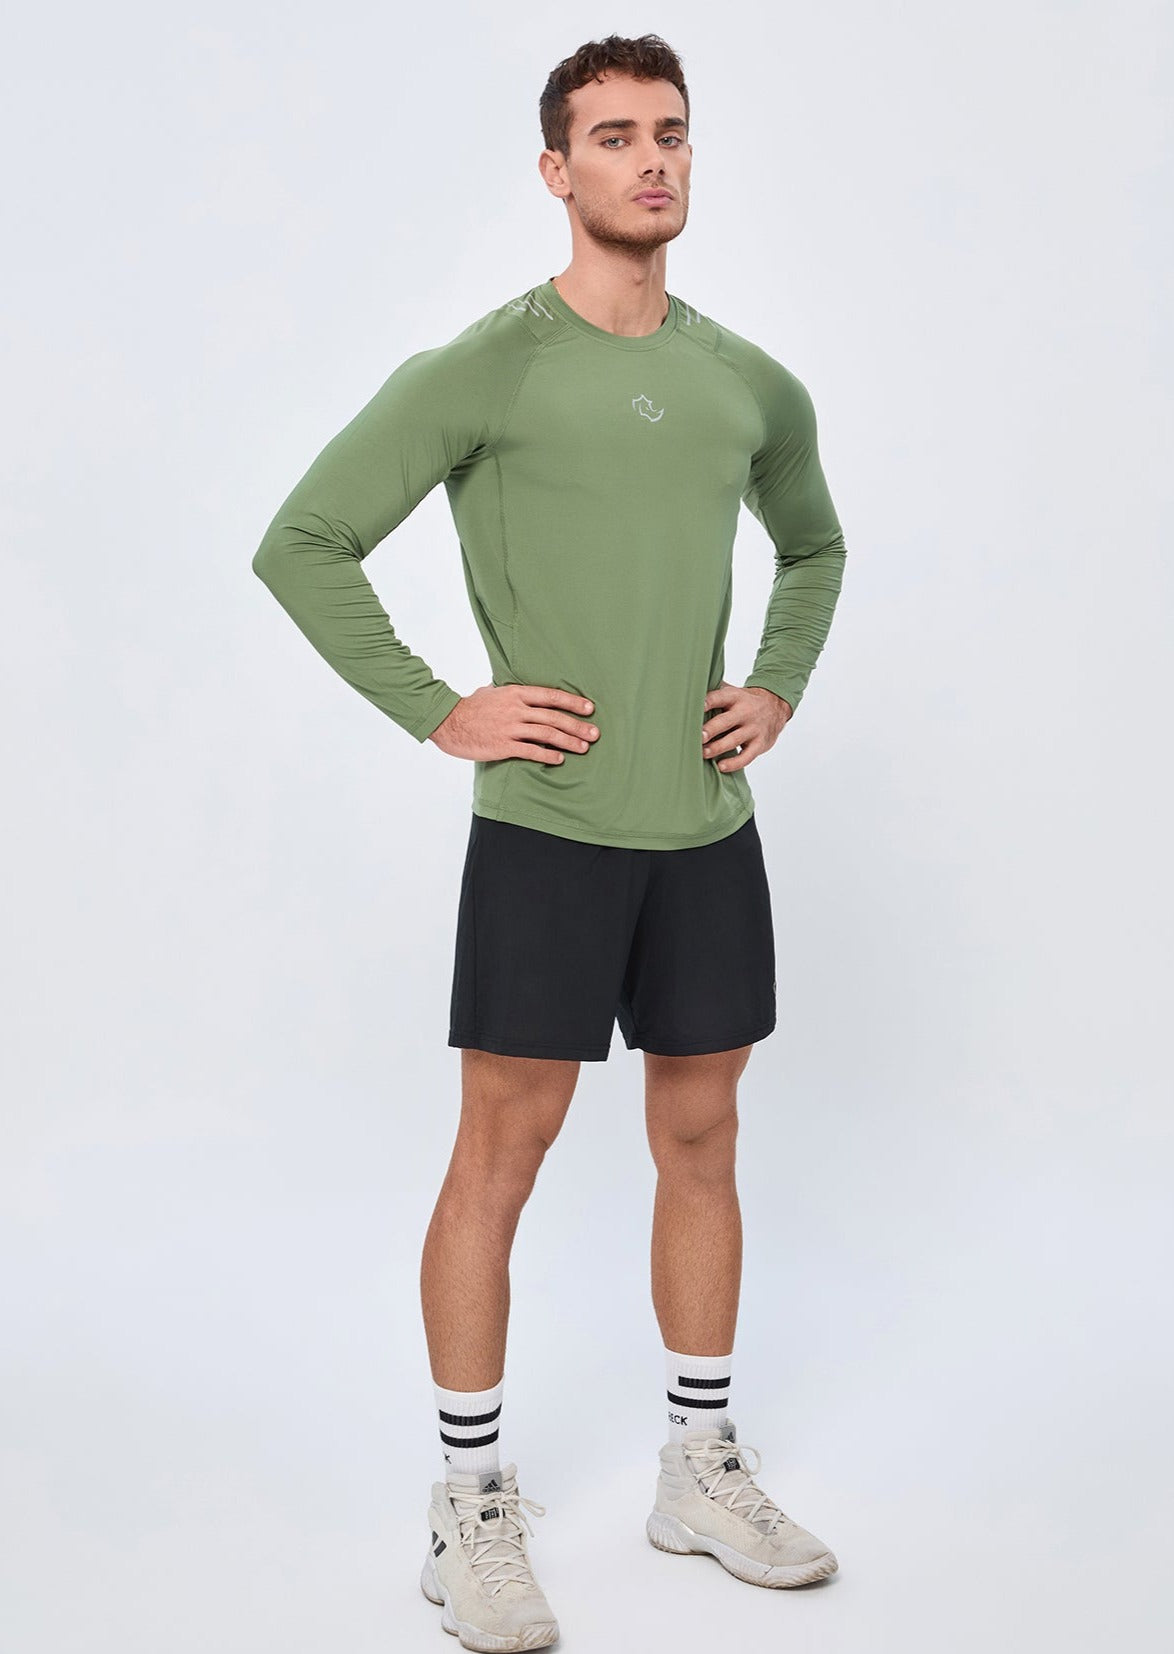 COMPRESSION FIT Long Sleeve CORE LONG SLEEVE - SAGE GREEN